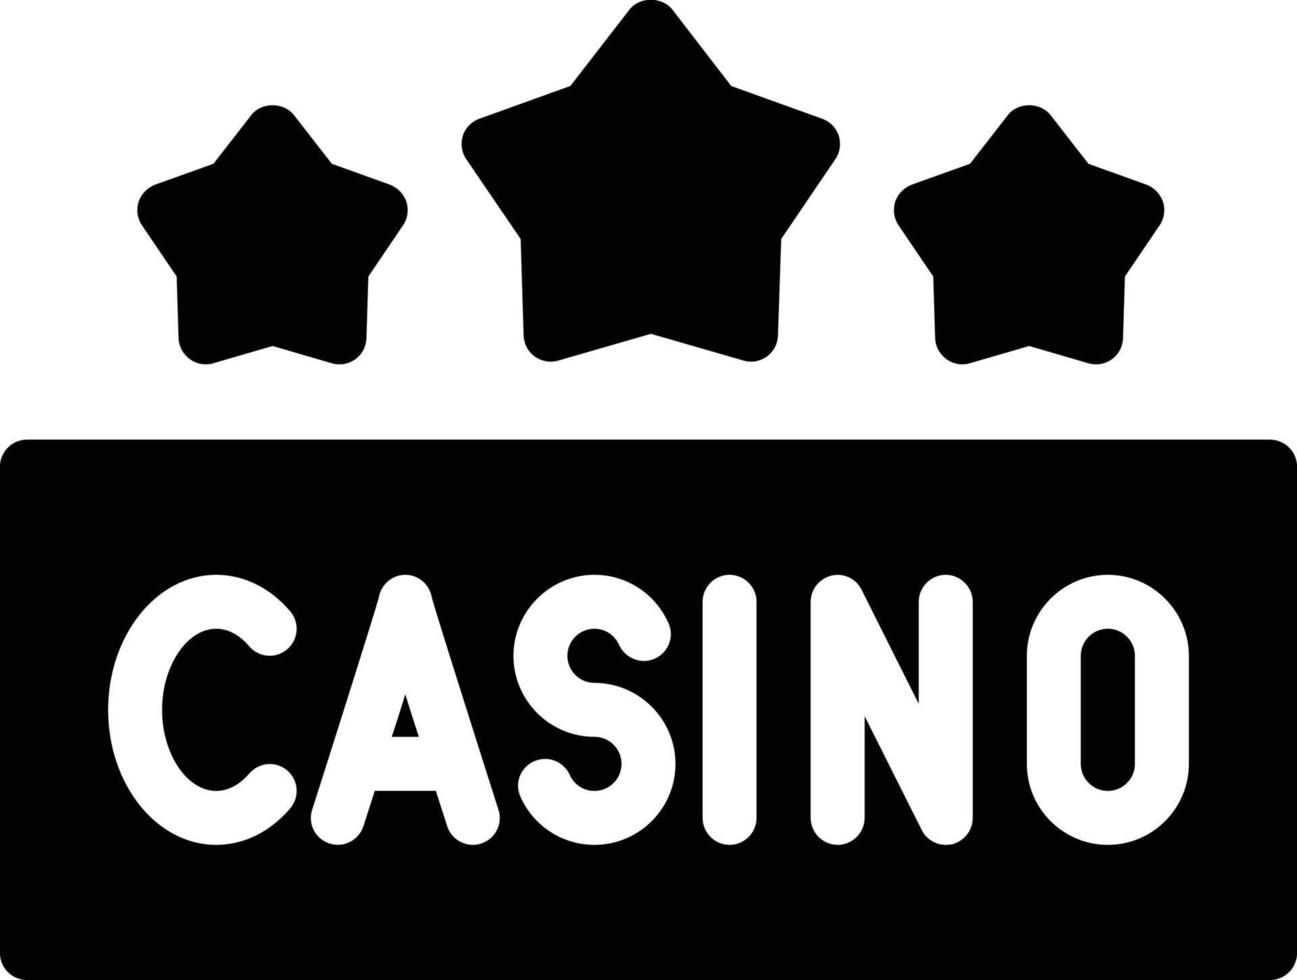 casino vector illustration on a background.Premium quality symbols.vector icons for concept and graphic design.